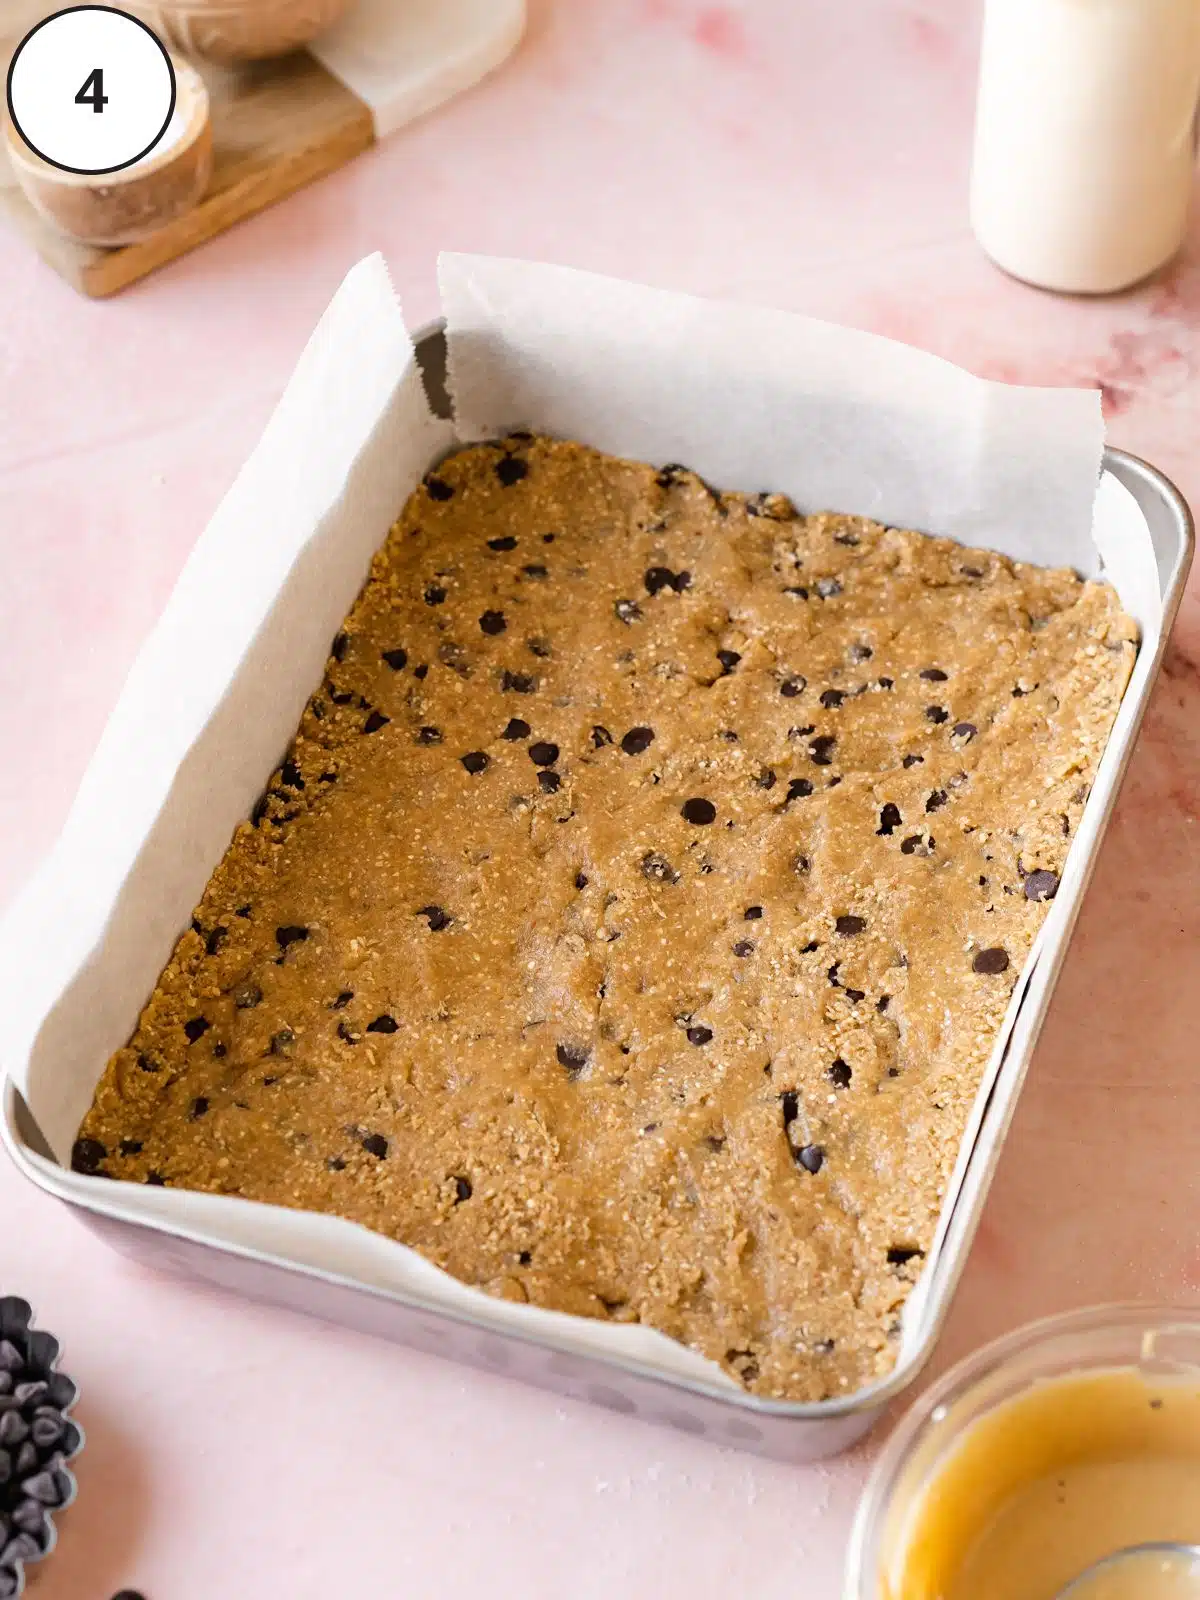 Parchment-lined baking tin with a layer of edible cookie dough pressed into the base.